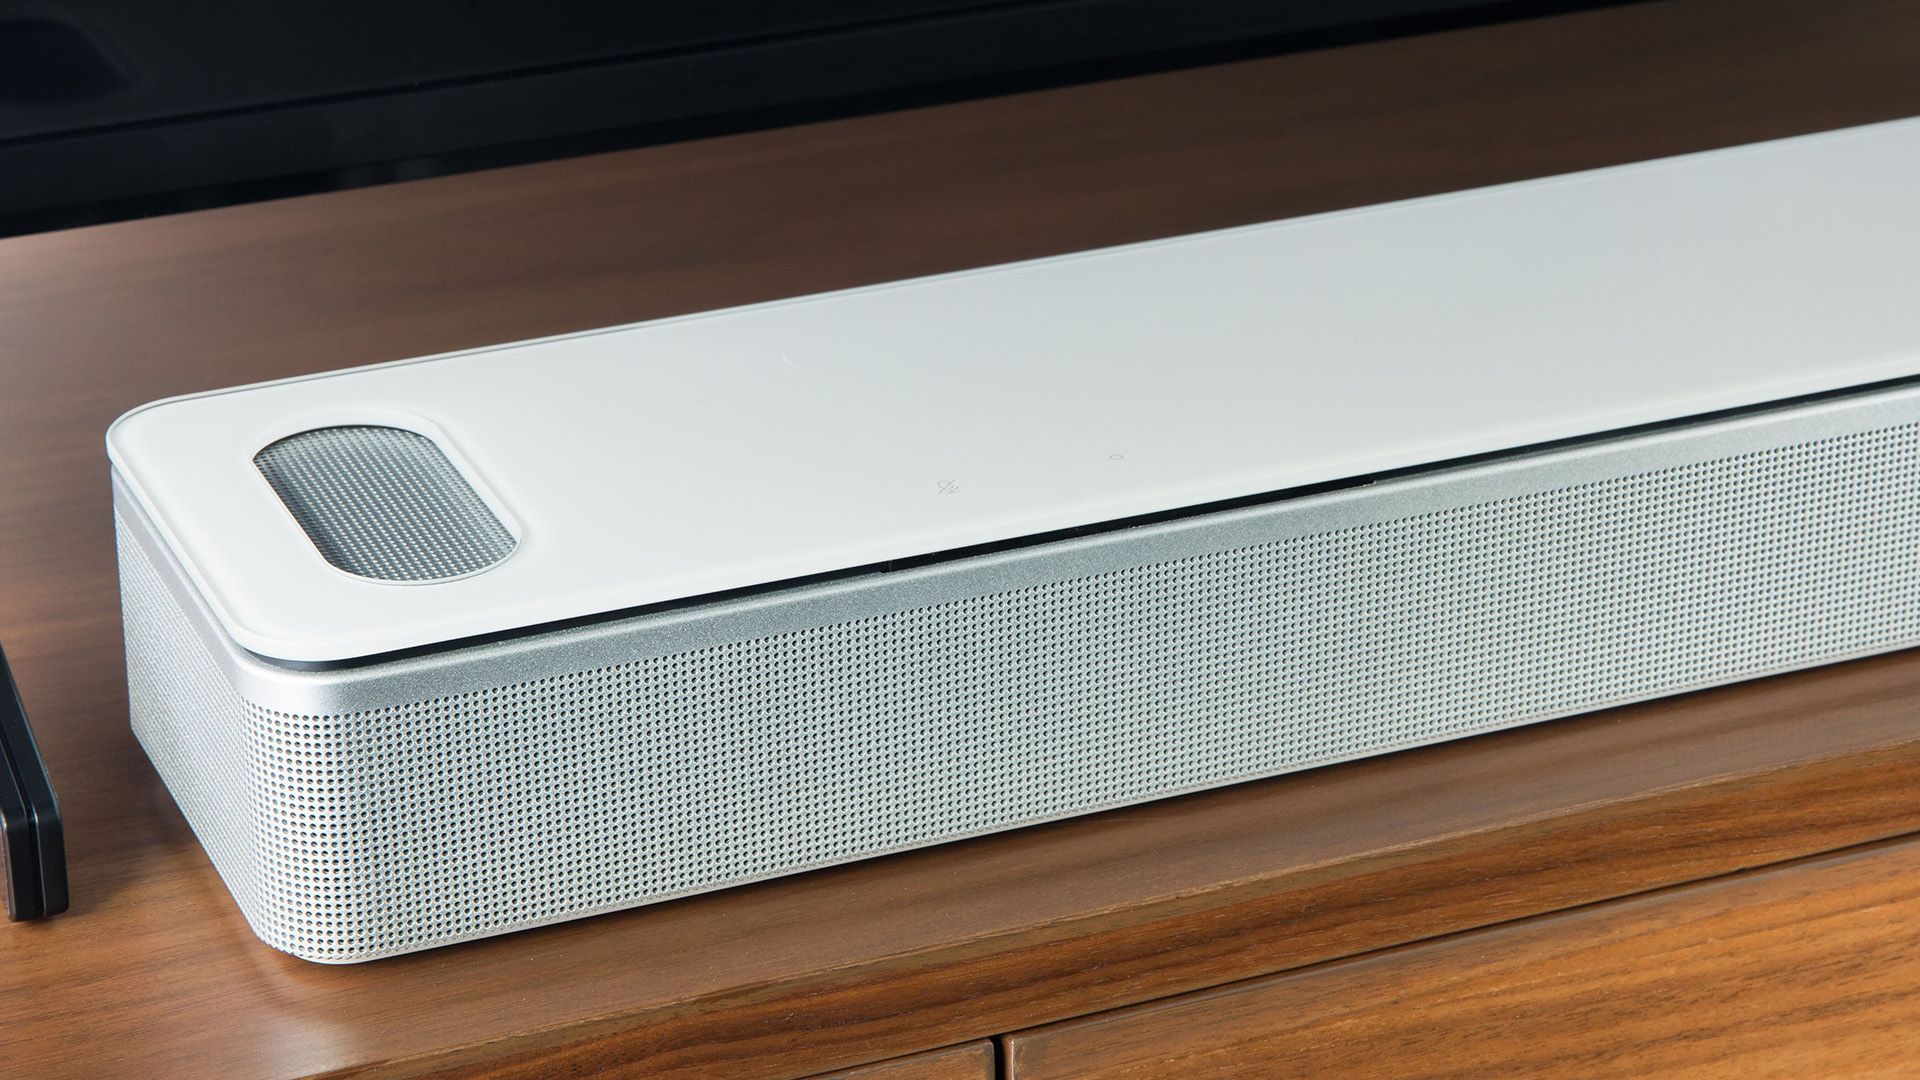 The new Bose Smart Ultra Soundbar combines Dolby Atmos and AI